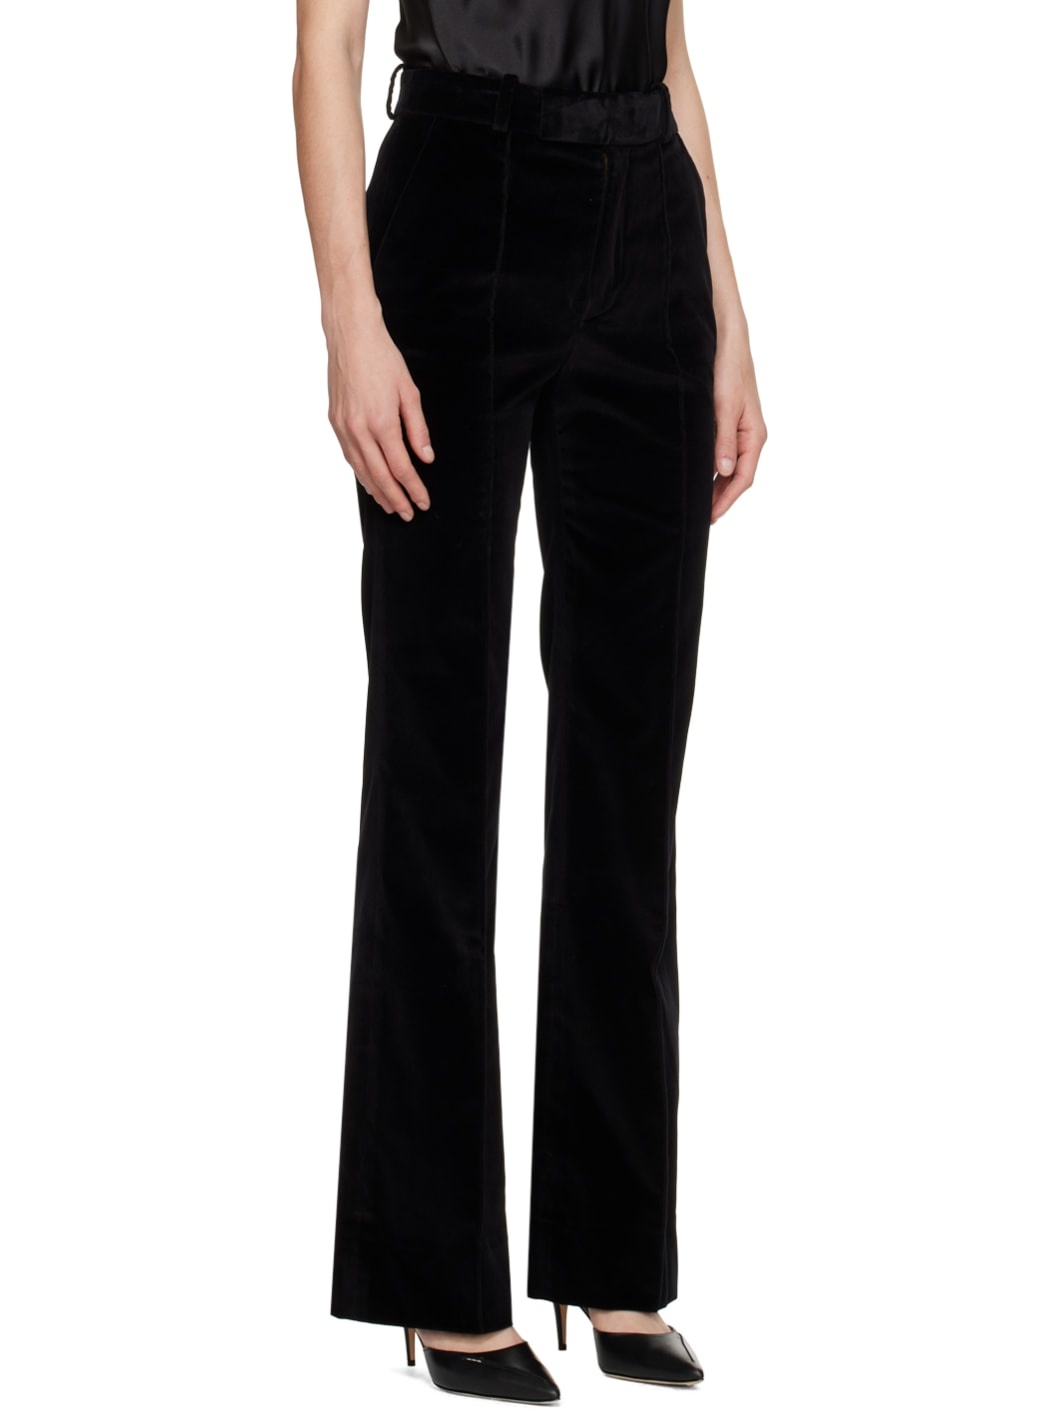 Black 'The Slim Stacked' Trousers - 2